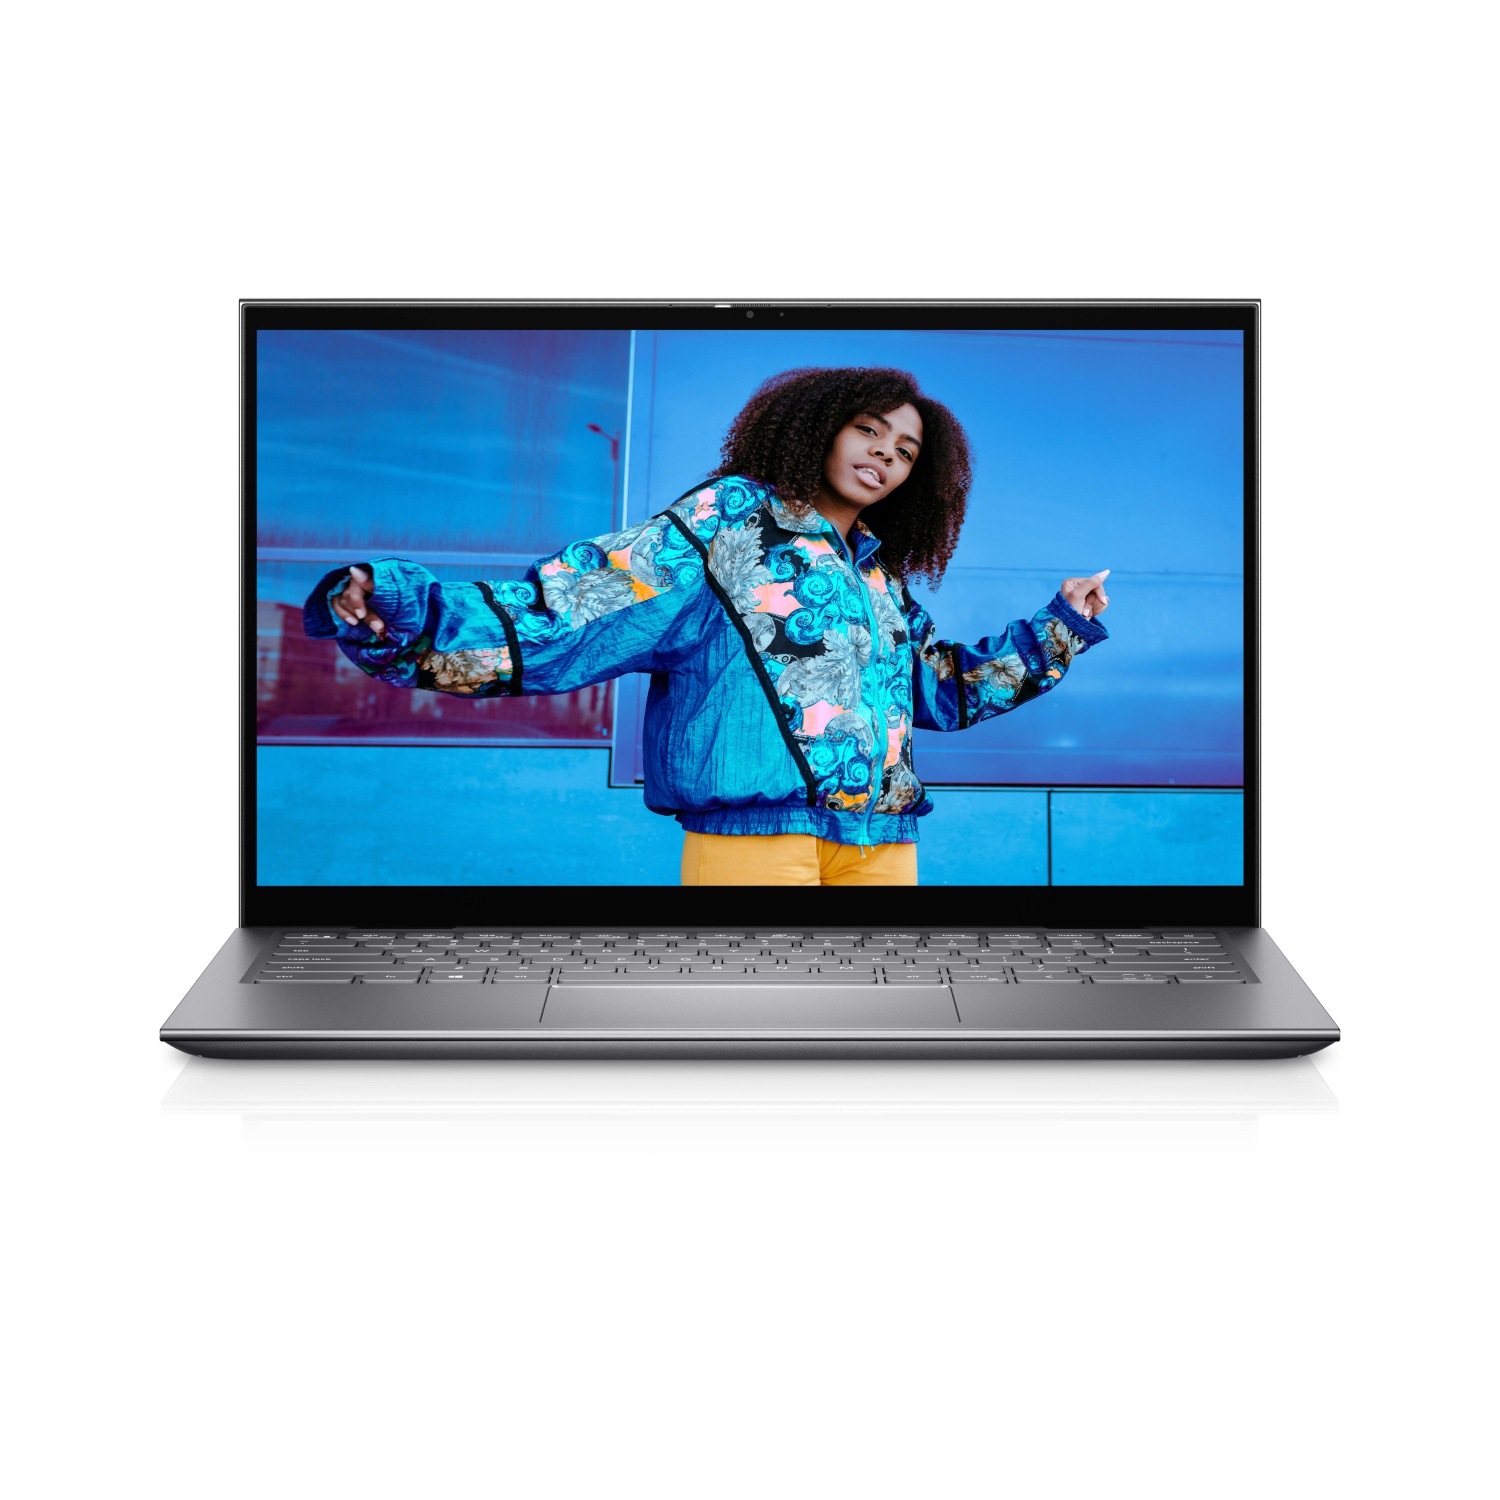 Dell Inspiron 14 5410 2-in-1 (2021) | 14" FHD Touch | Core i5 - 256GB SSD - 8GB RAM | 4 Cores @ 4.2 GHz - 11th Gen CPU Certified Refurbished